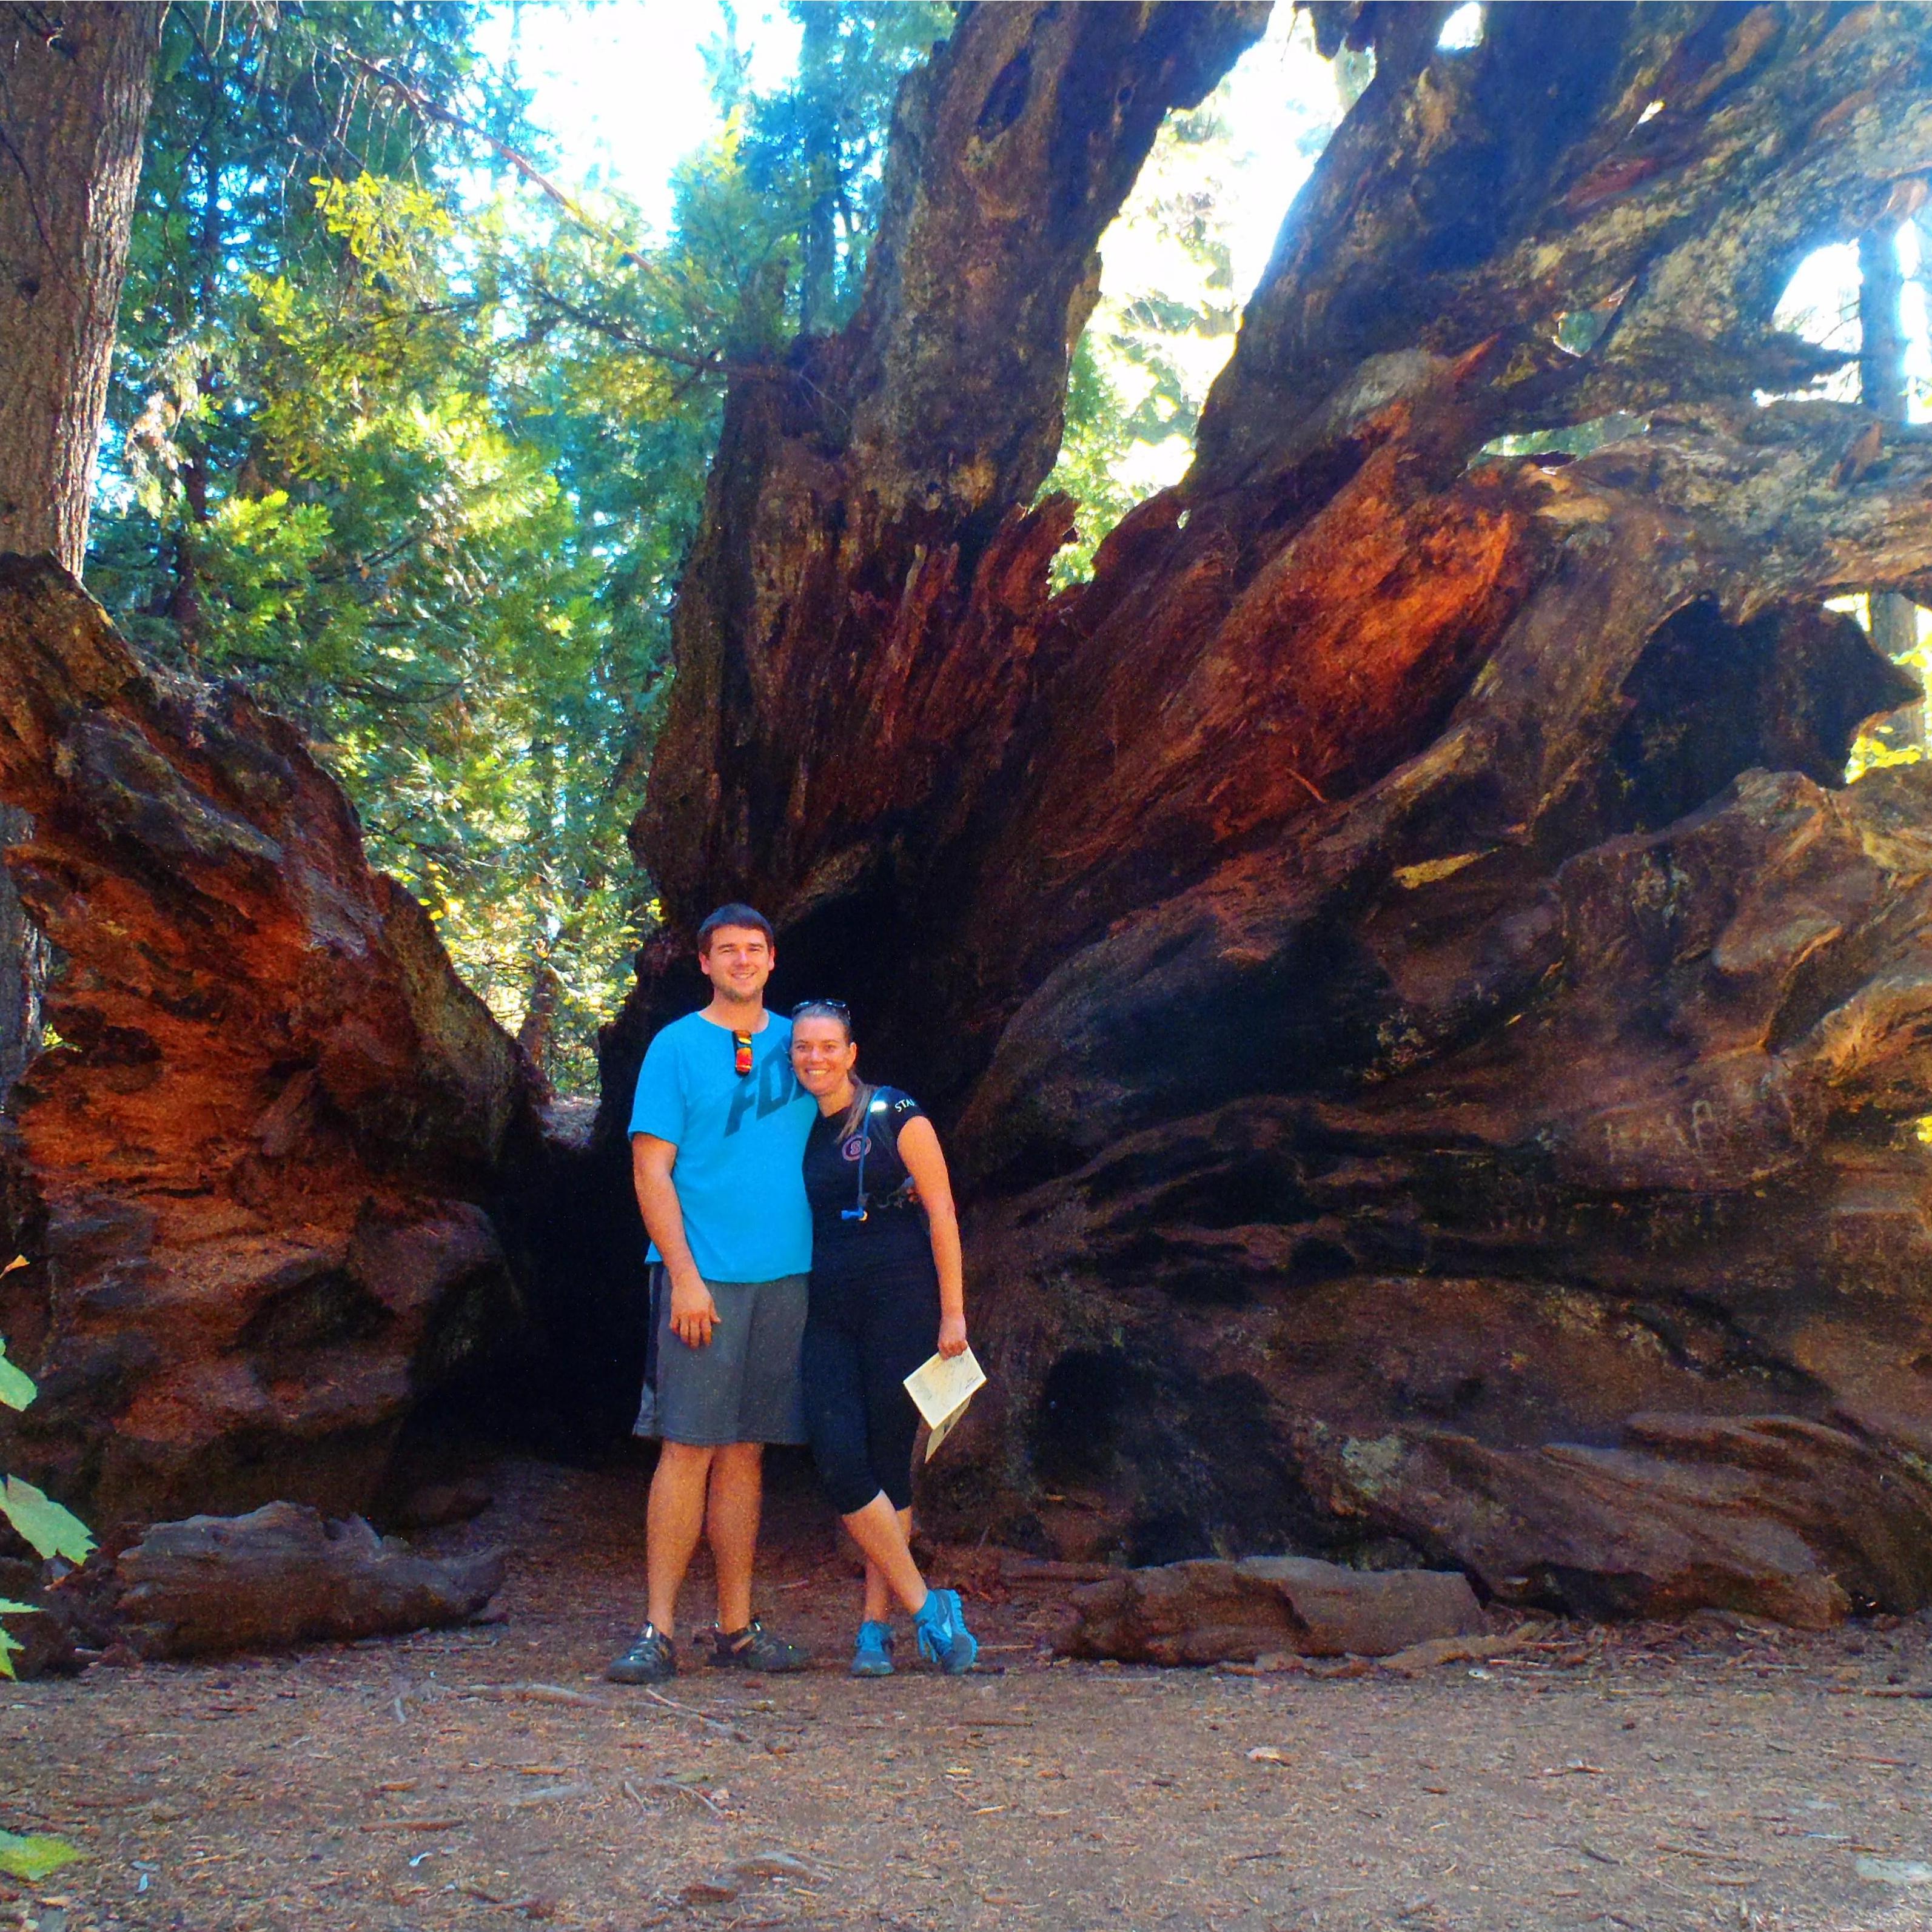 First camping trip to Calaveras Big Trees State Park.